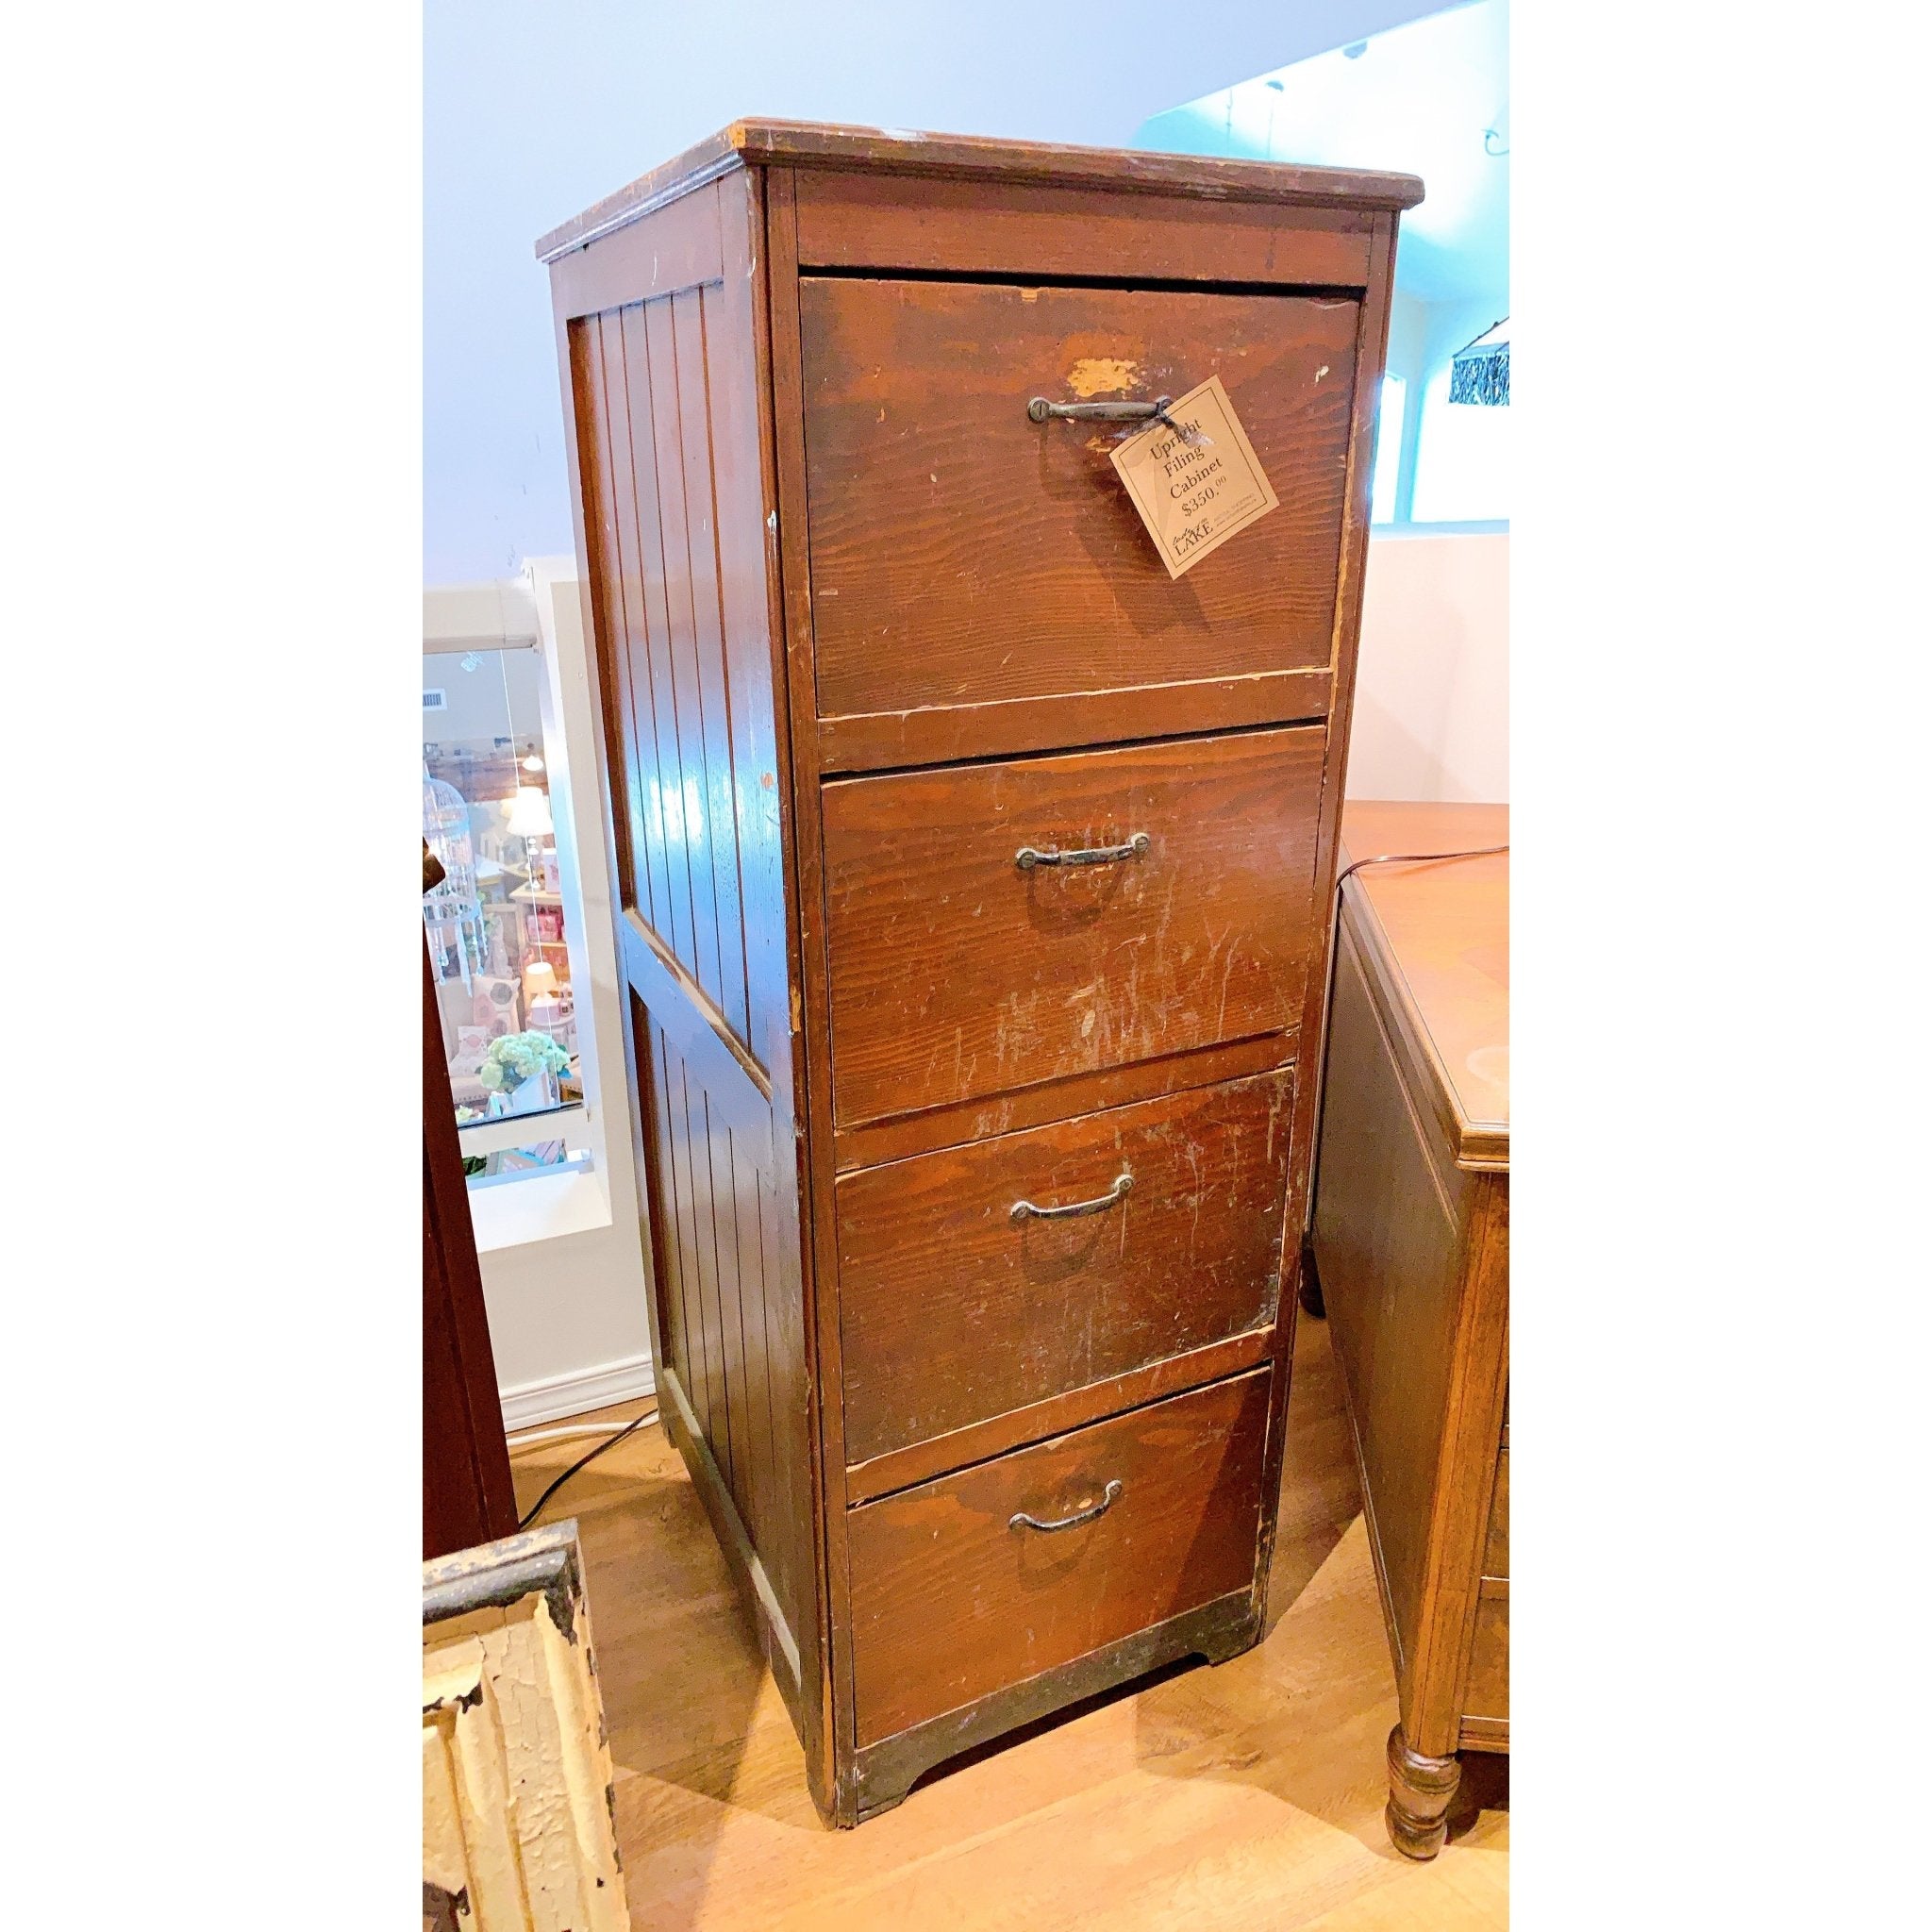 Upright Wooden Filing Cabinet